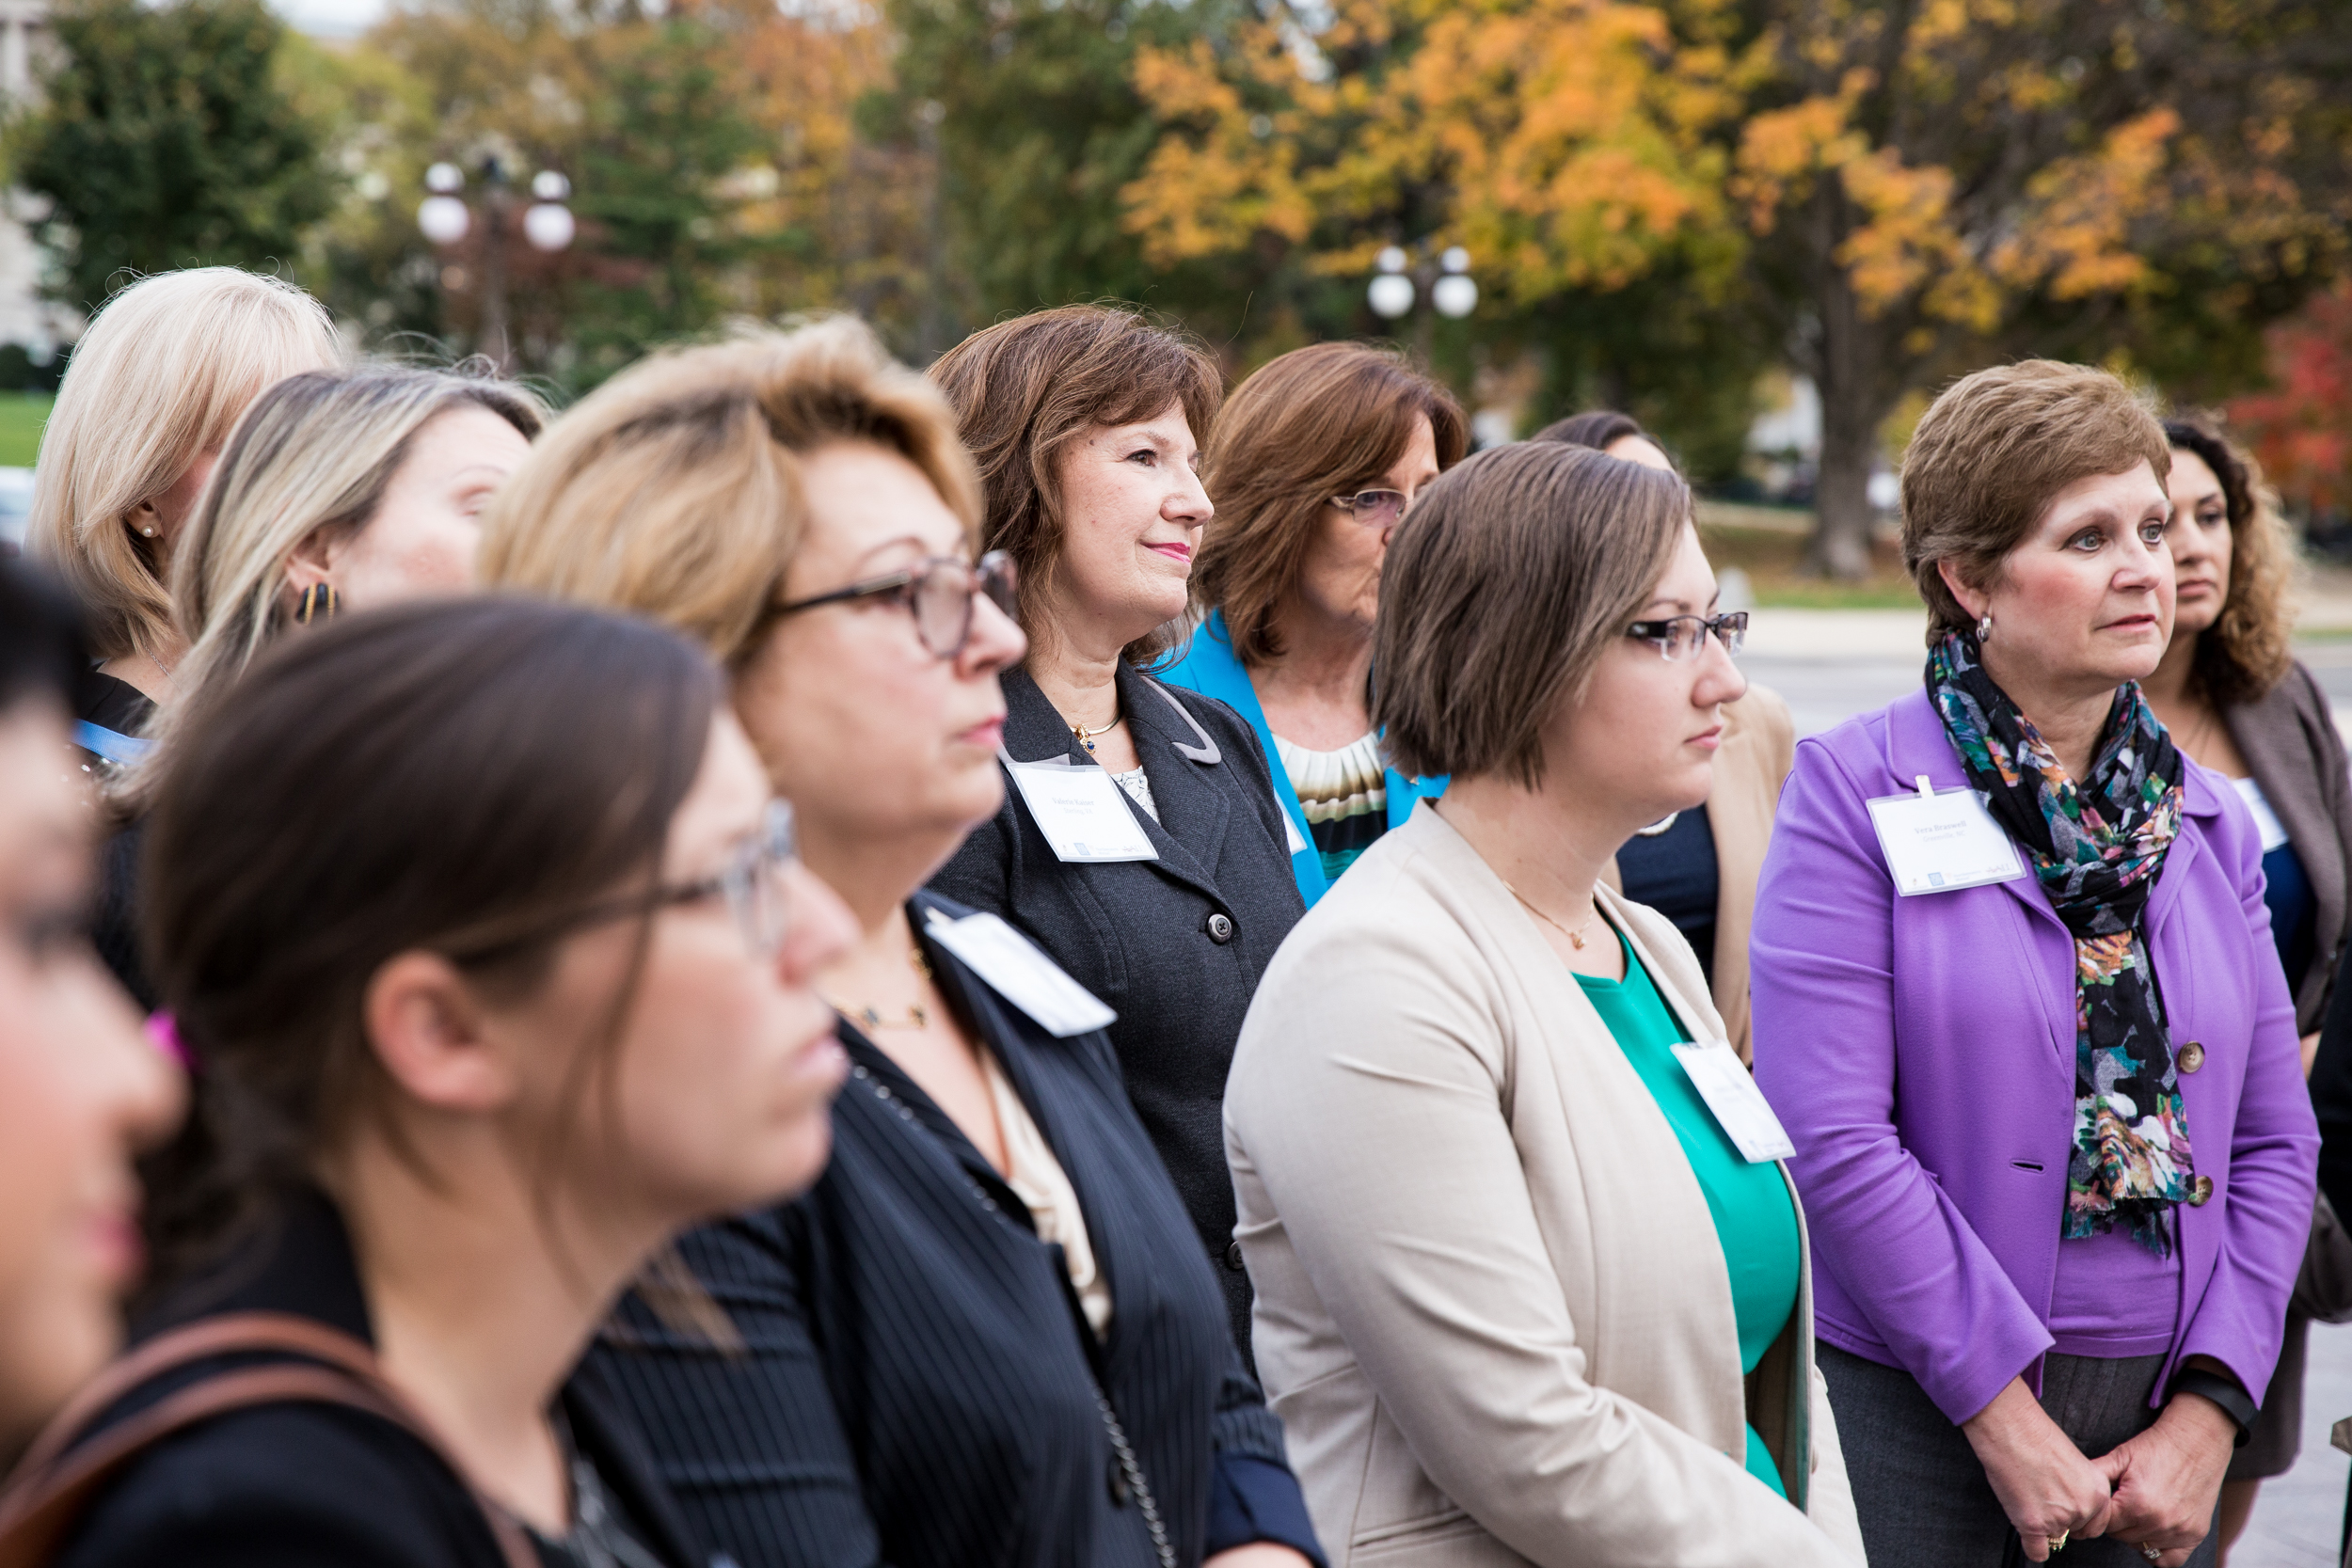 Life insurance agents listen during a tour of the U.S. Capitol building